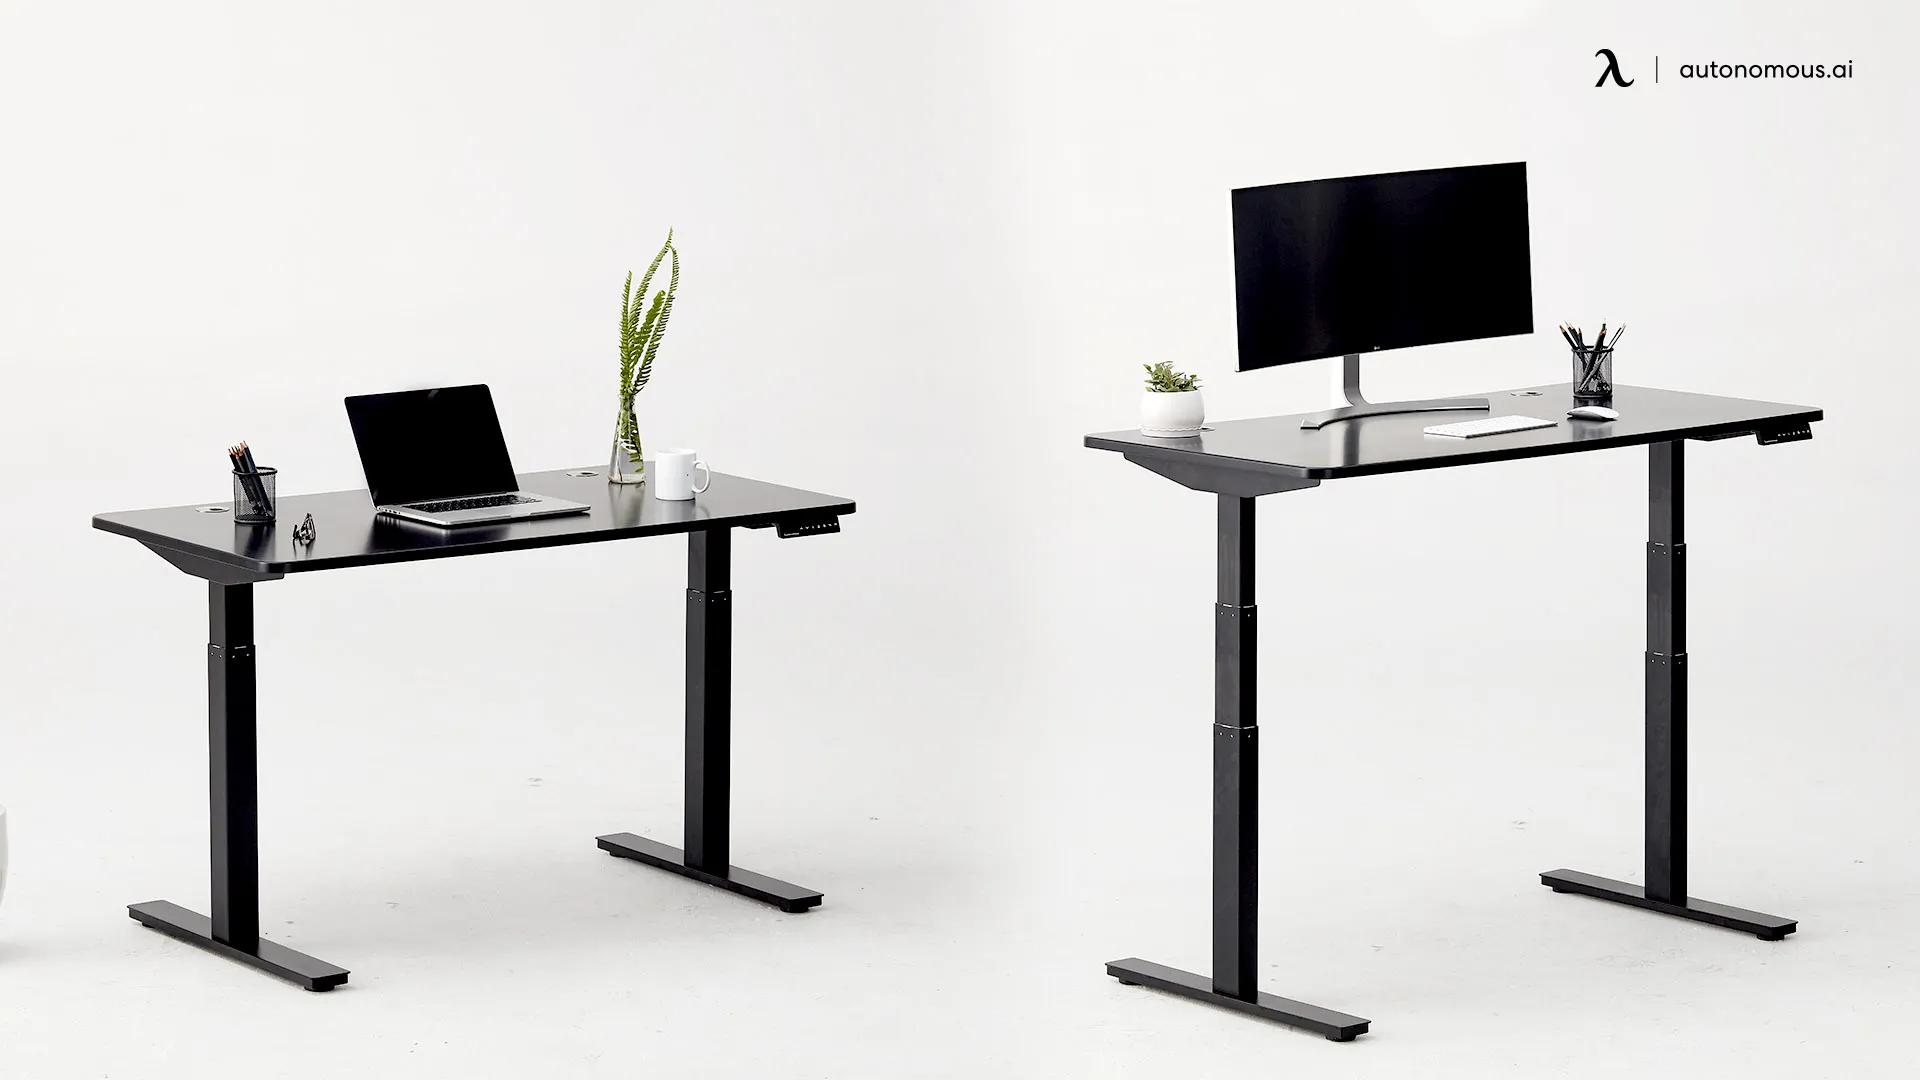 Why Does the Desk Weight Vary from Desk to Desk?